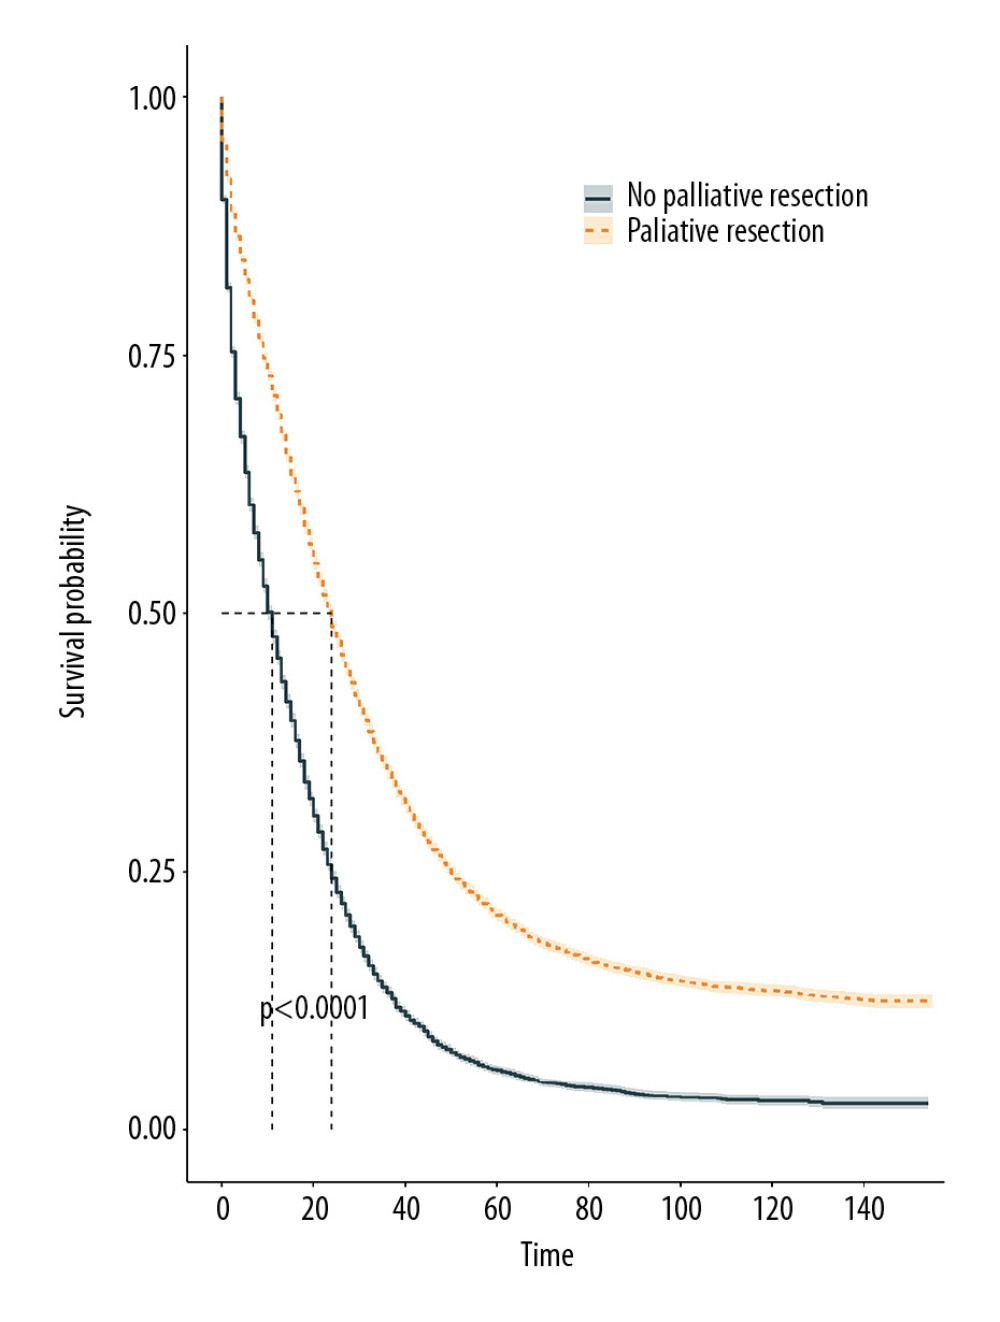 Cancer-specific survival curves of colorectal cancer patients with and without palliative resection of the primary tumors using Kaplan-Meier methods.